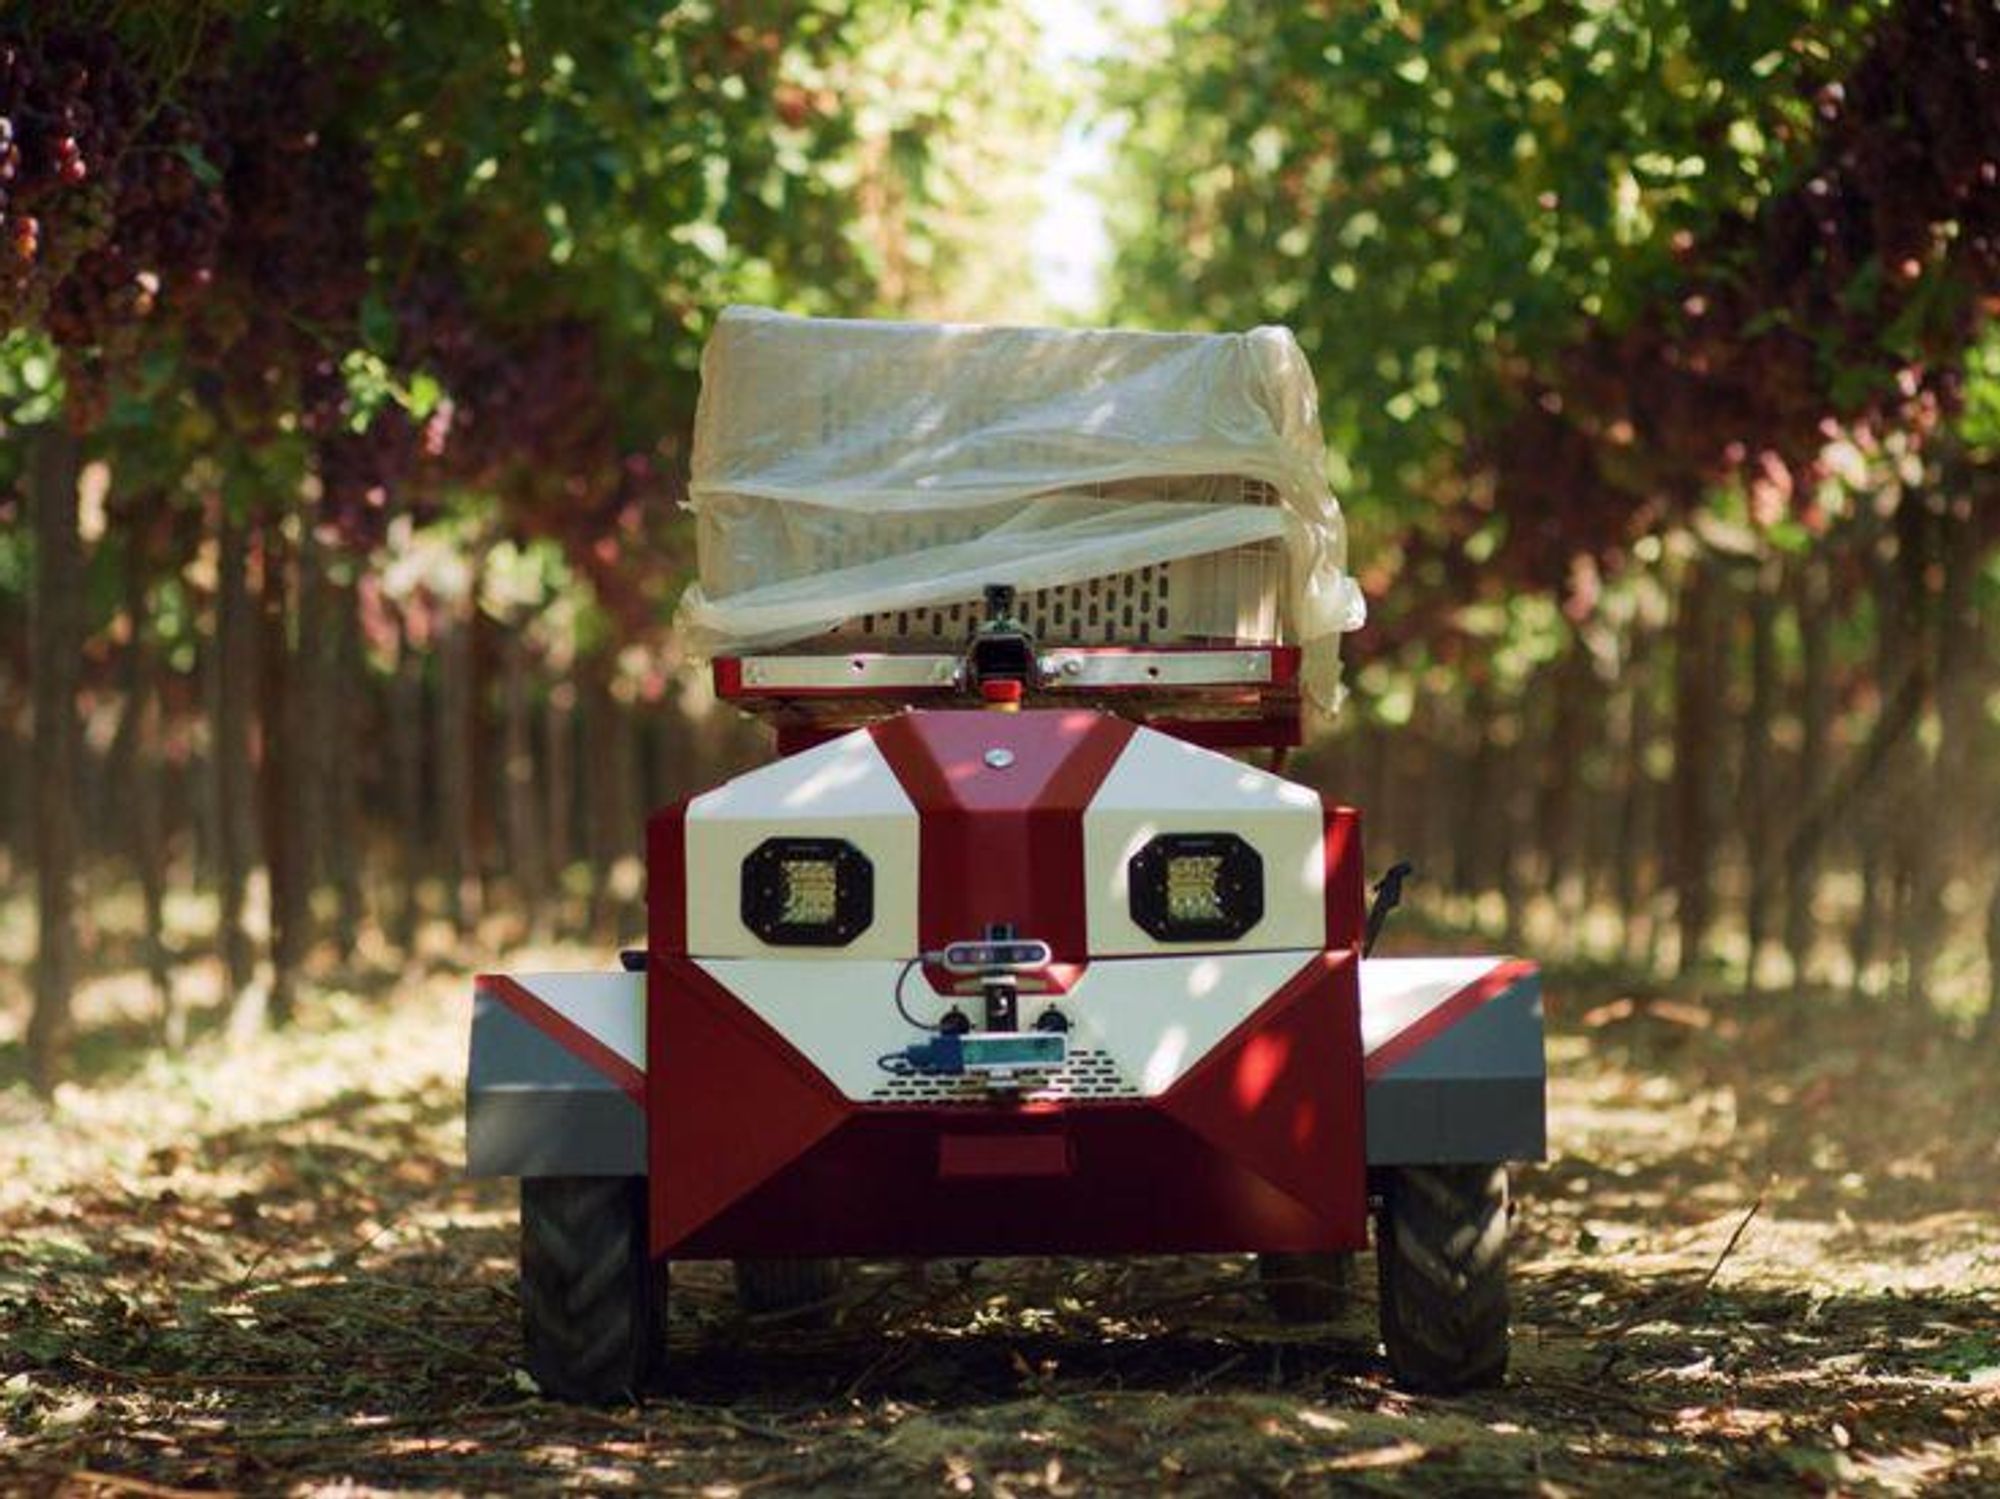 Future Acres' Robots Are Moving Onto More Farms to Fill a Worker Shortage